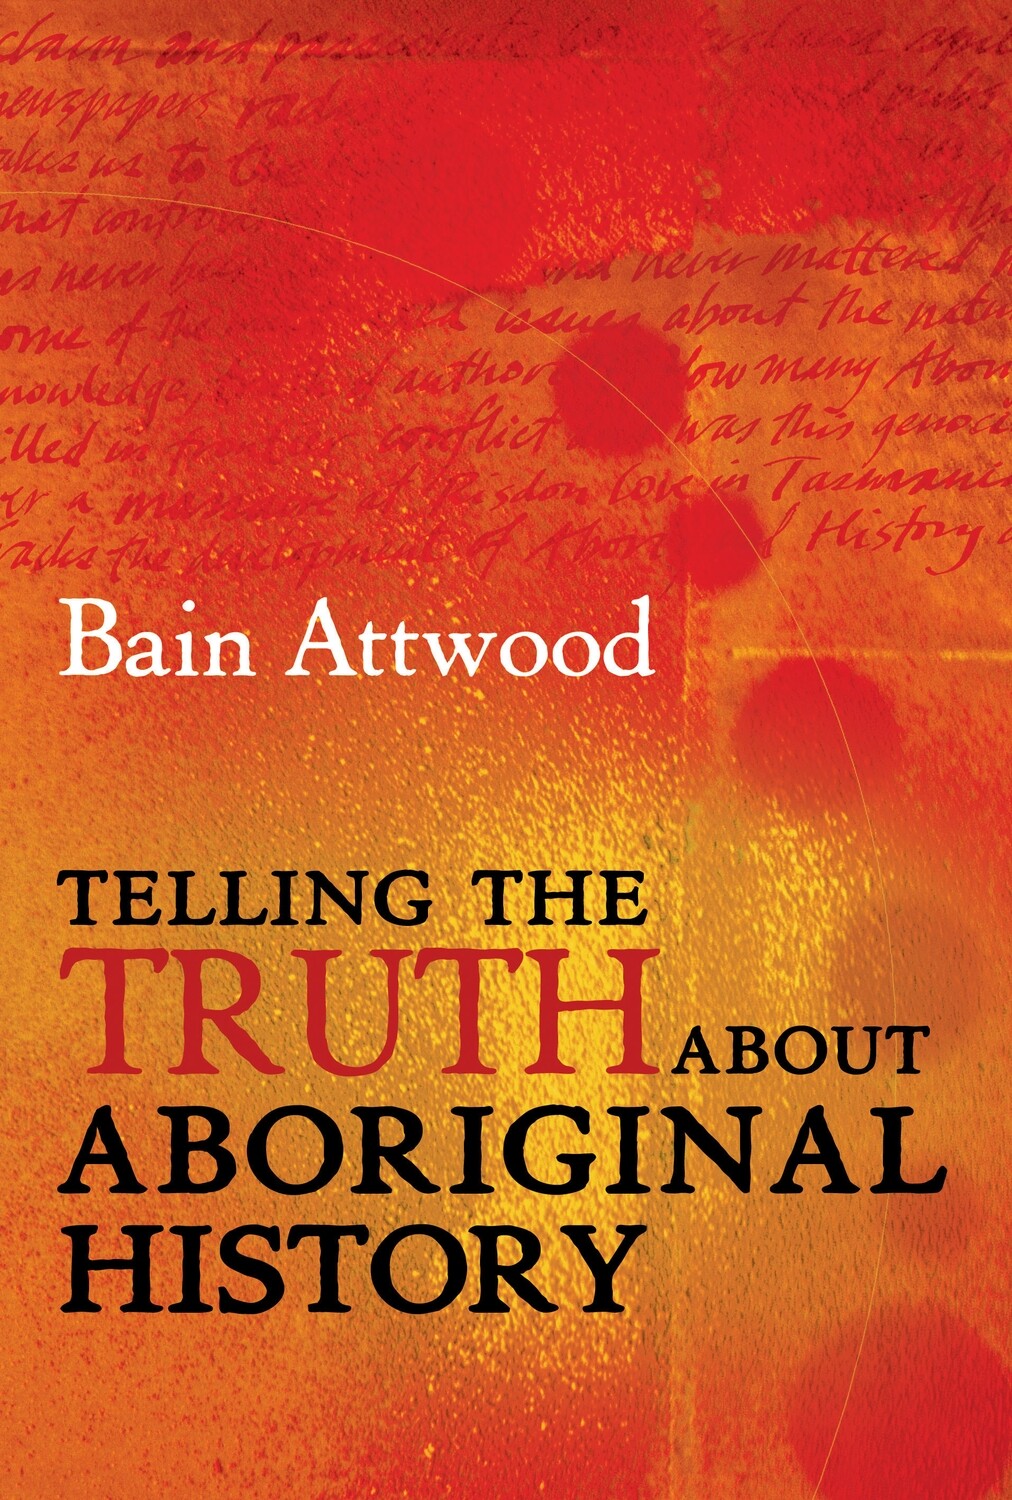 Telling the Truth About Aboriginal History by Bain Attwood